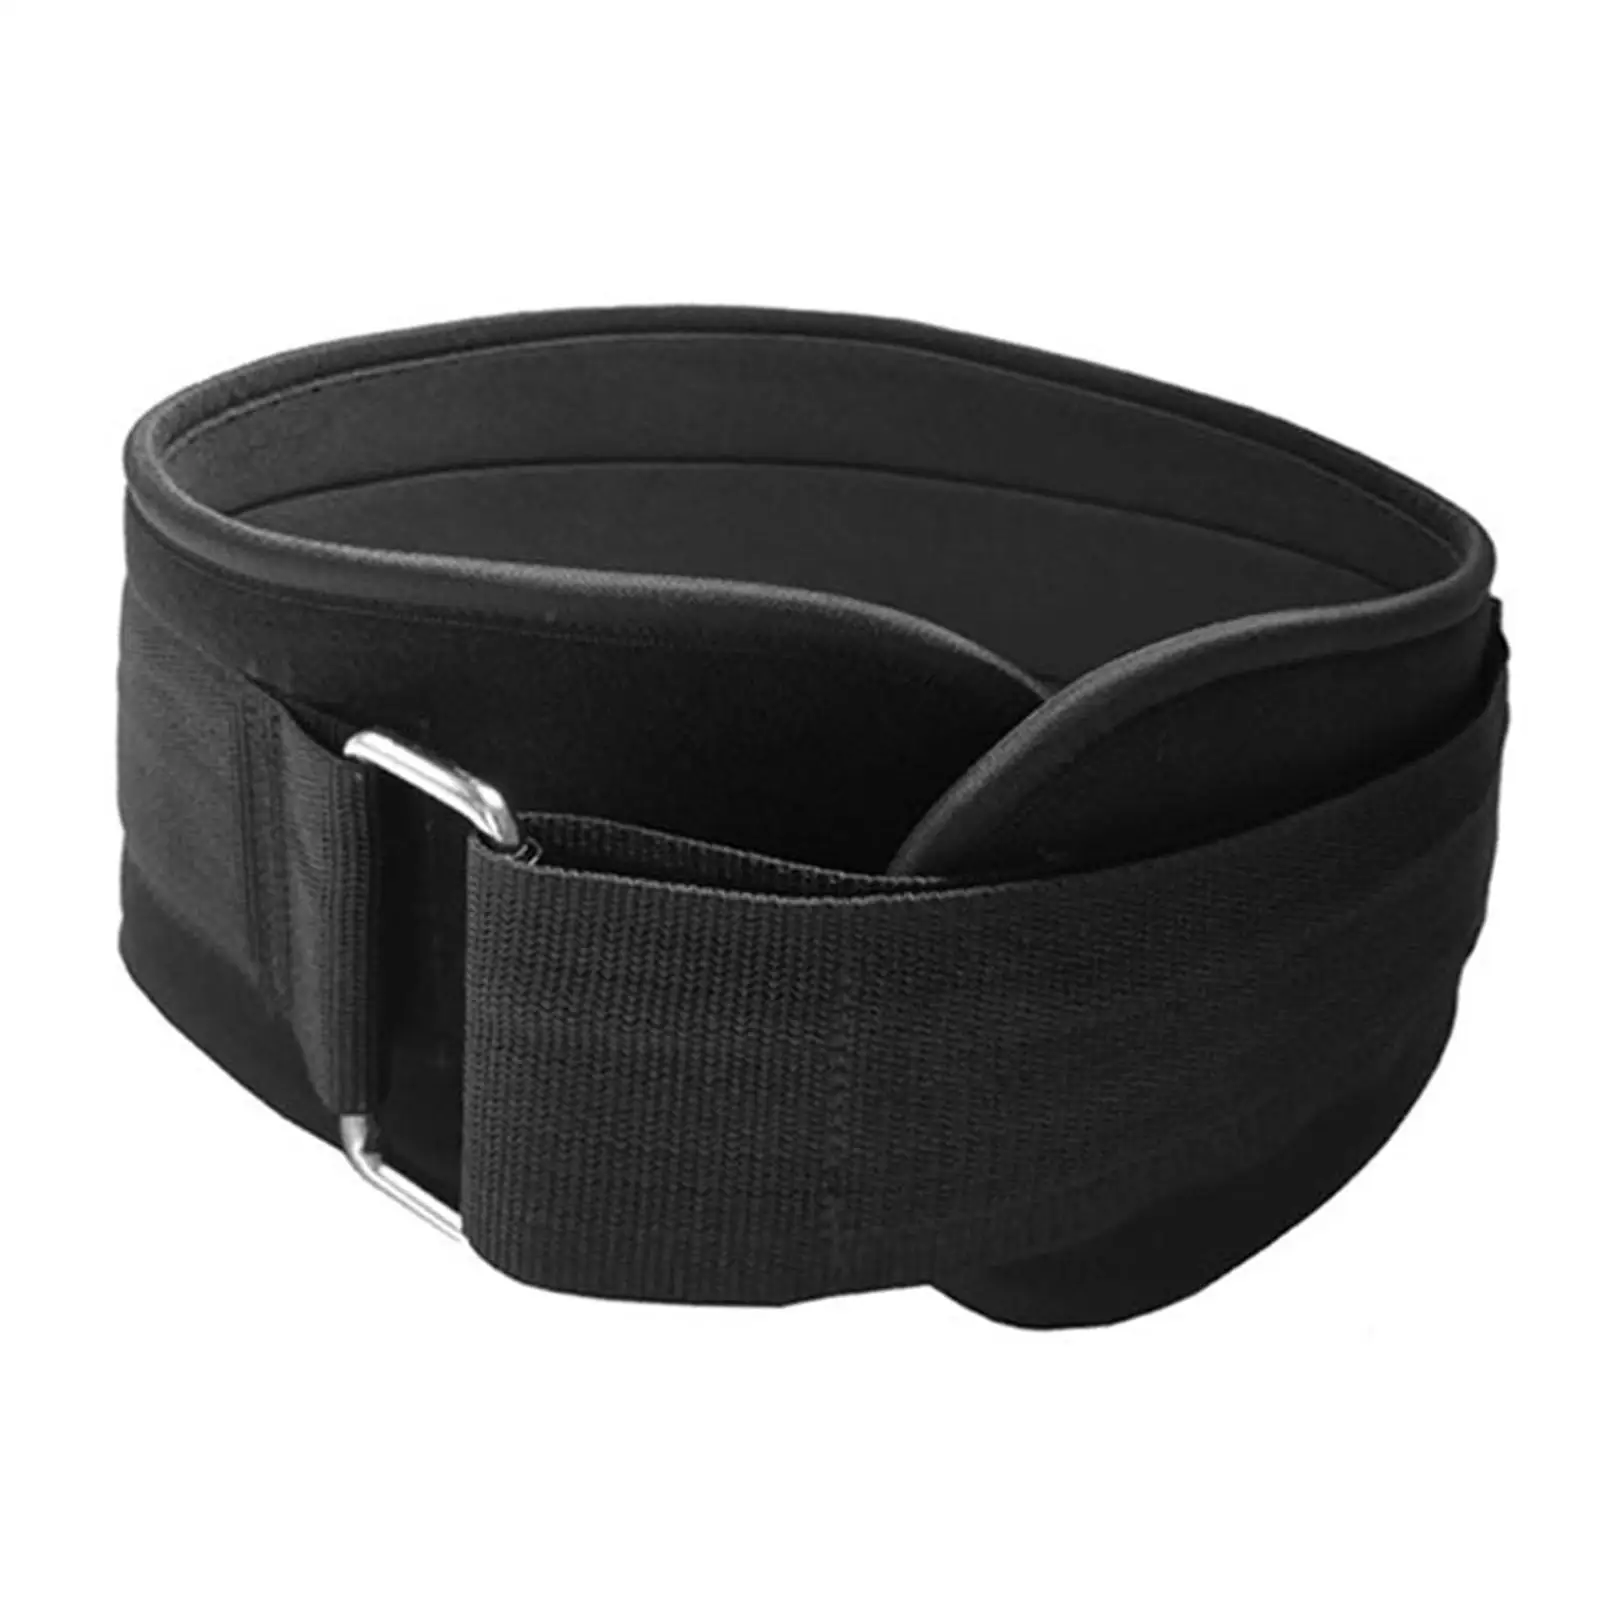 Wasit Brace Abdominal Protector Weight Lifting Belts Bodybuilding Deadlift Back Supporting Back Supporting Belt for Sweat Belt